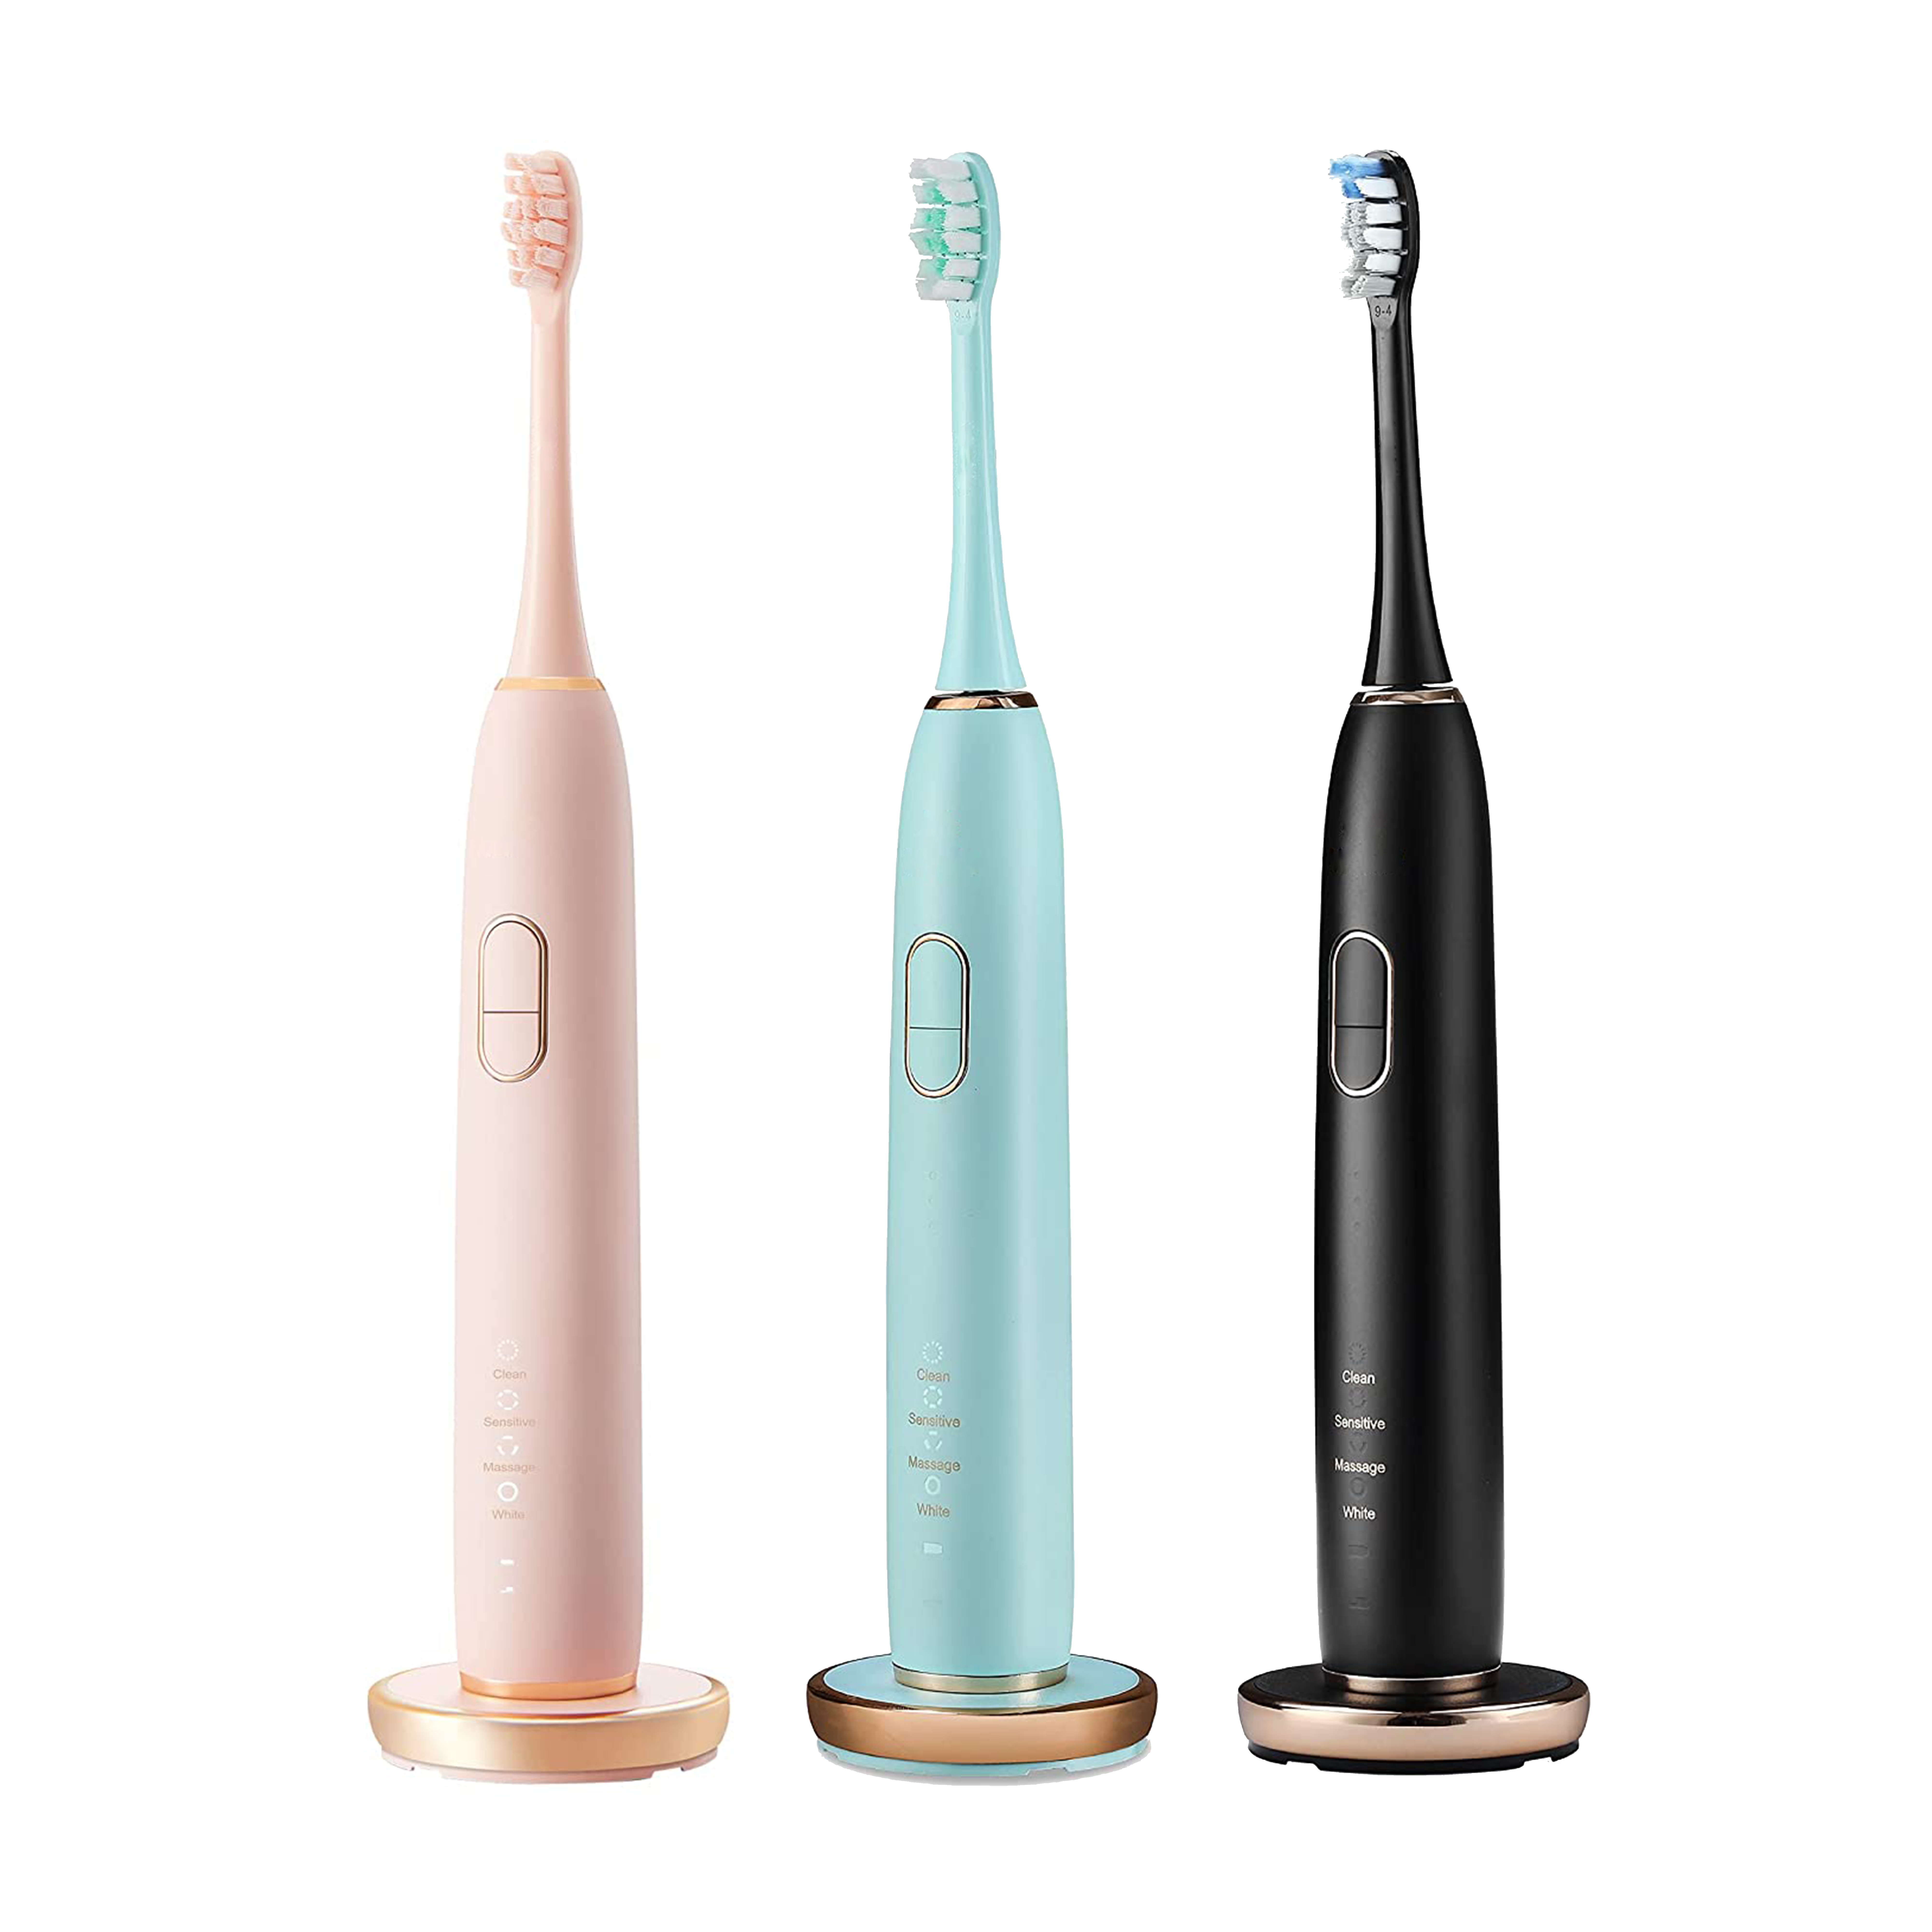 Is it better to use a regular toothbrush or an electric toothbrush?